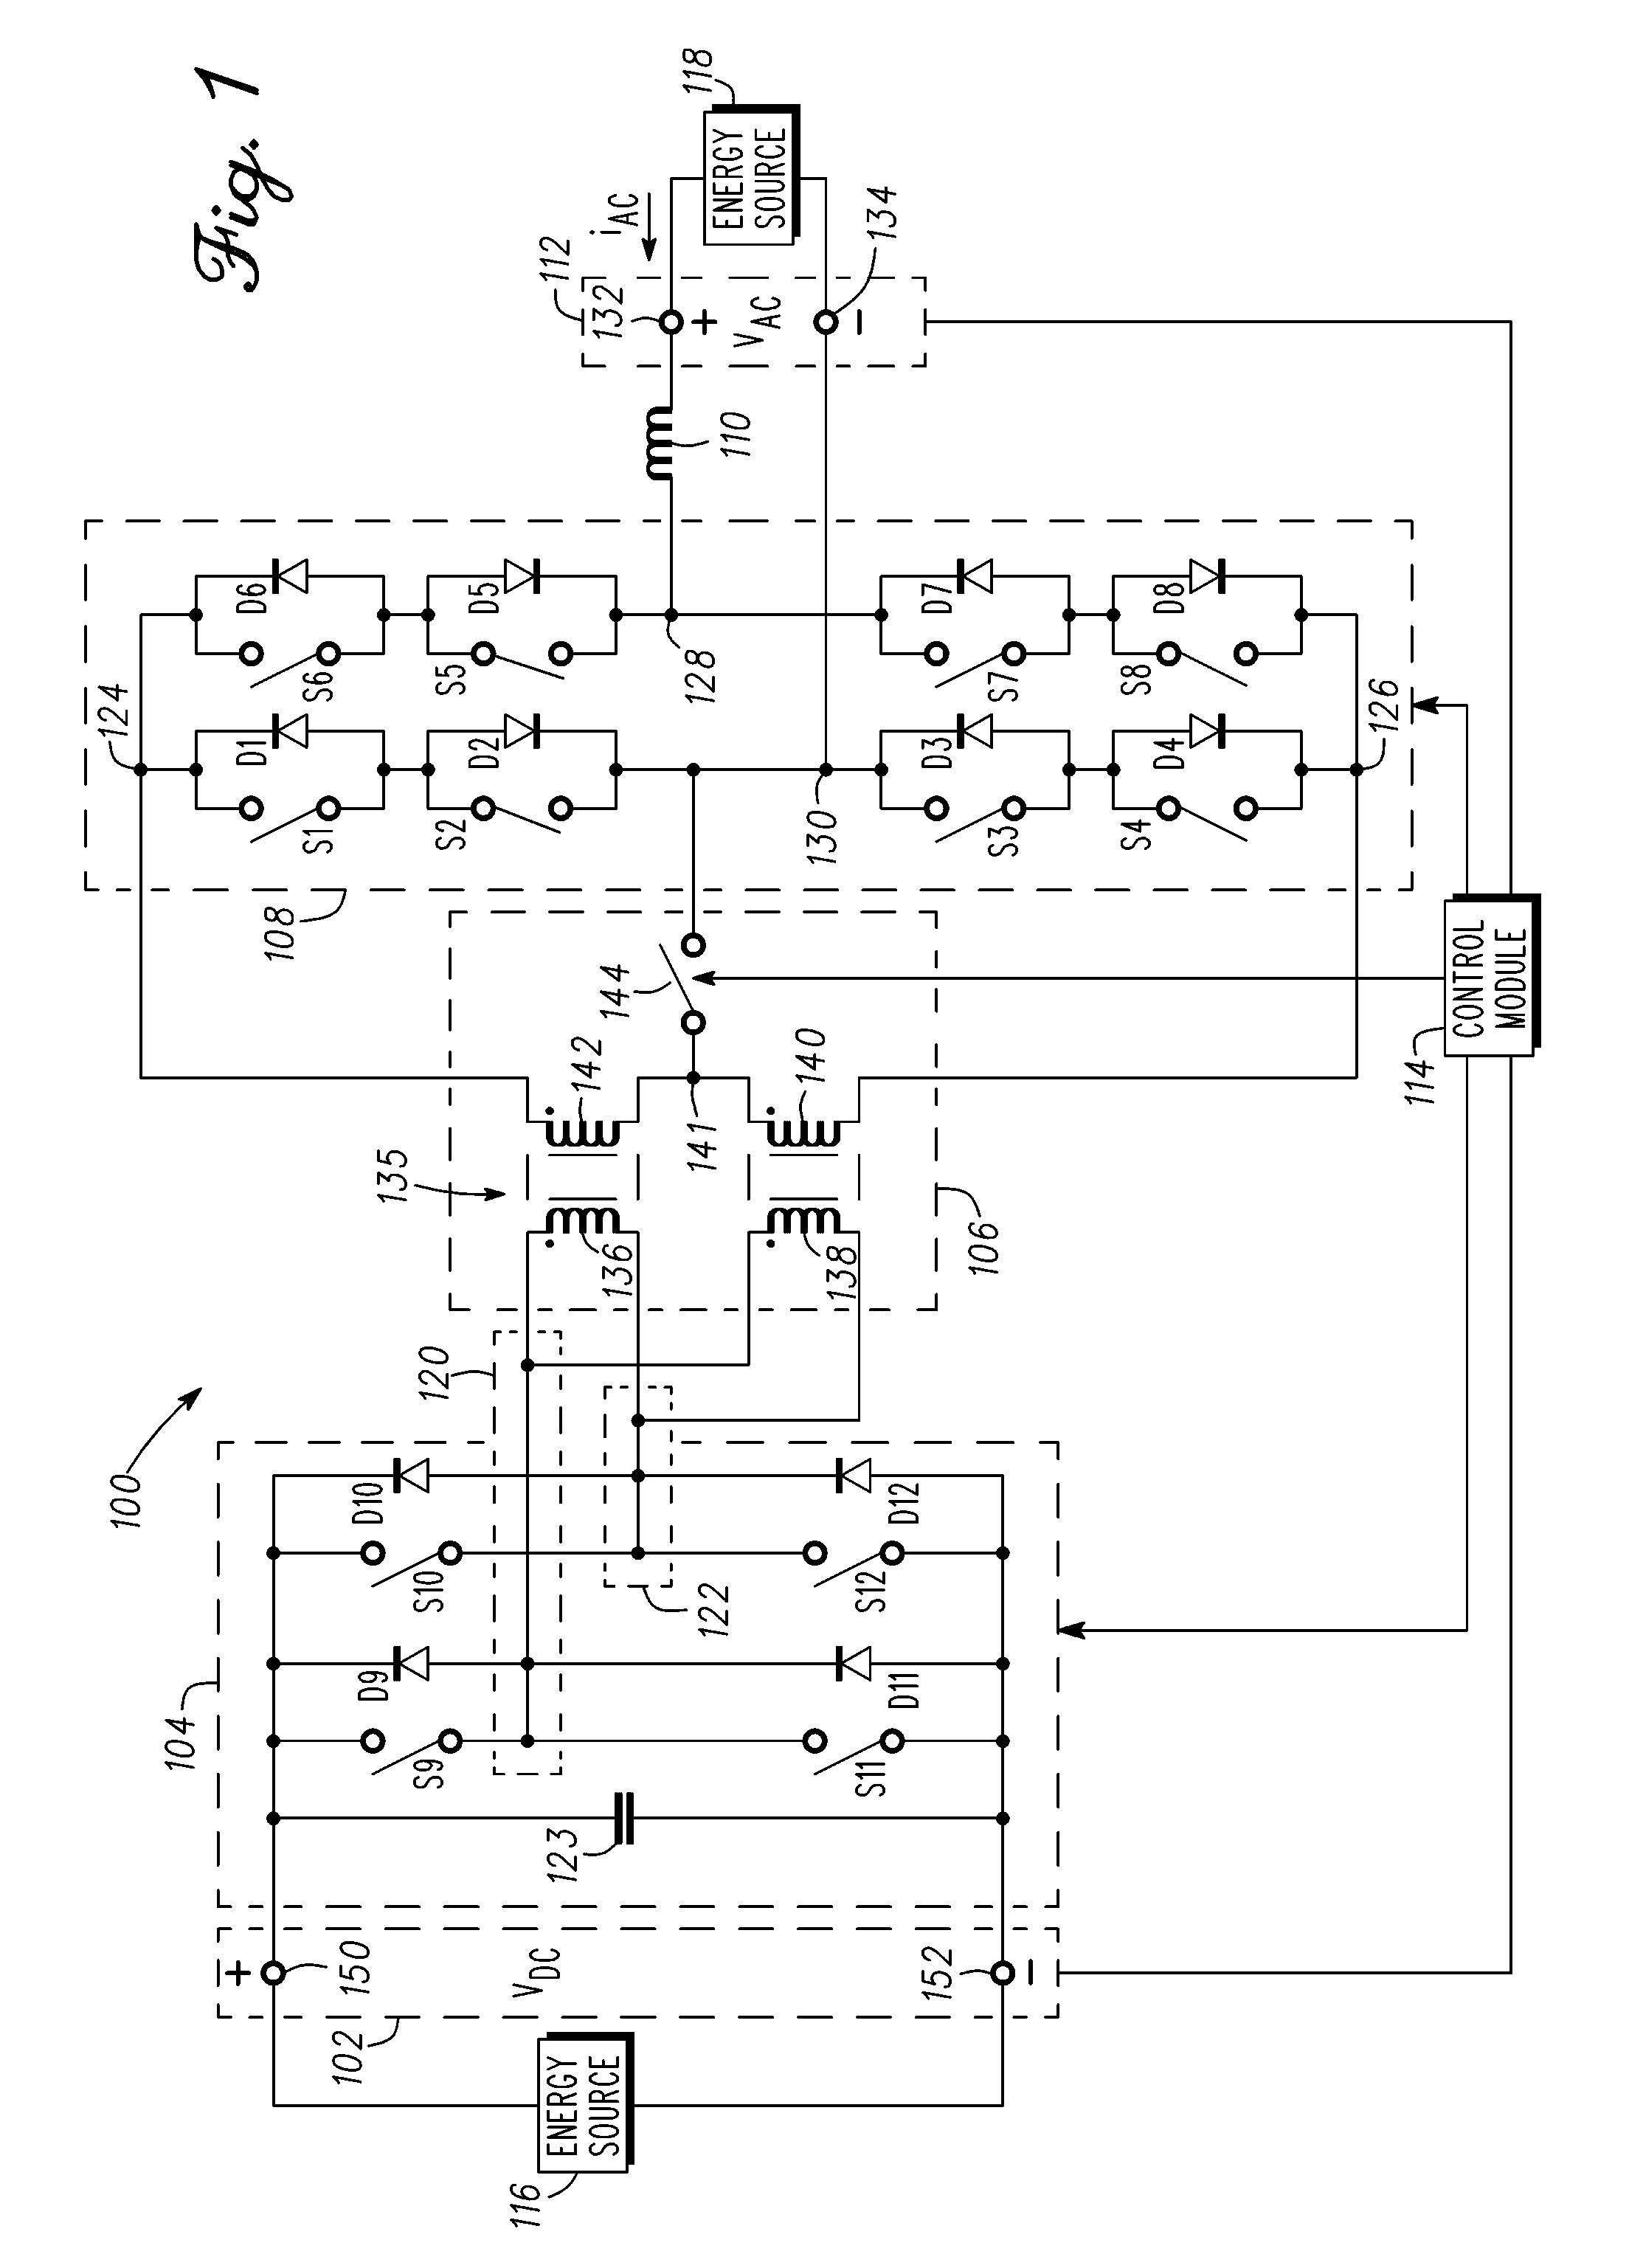 Charging system with galvanic isolation and multiple operating modes